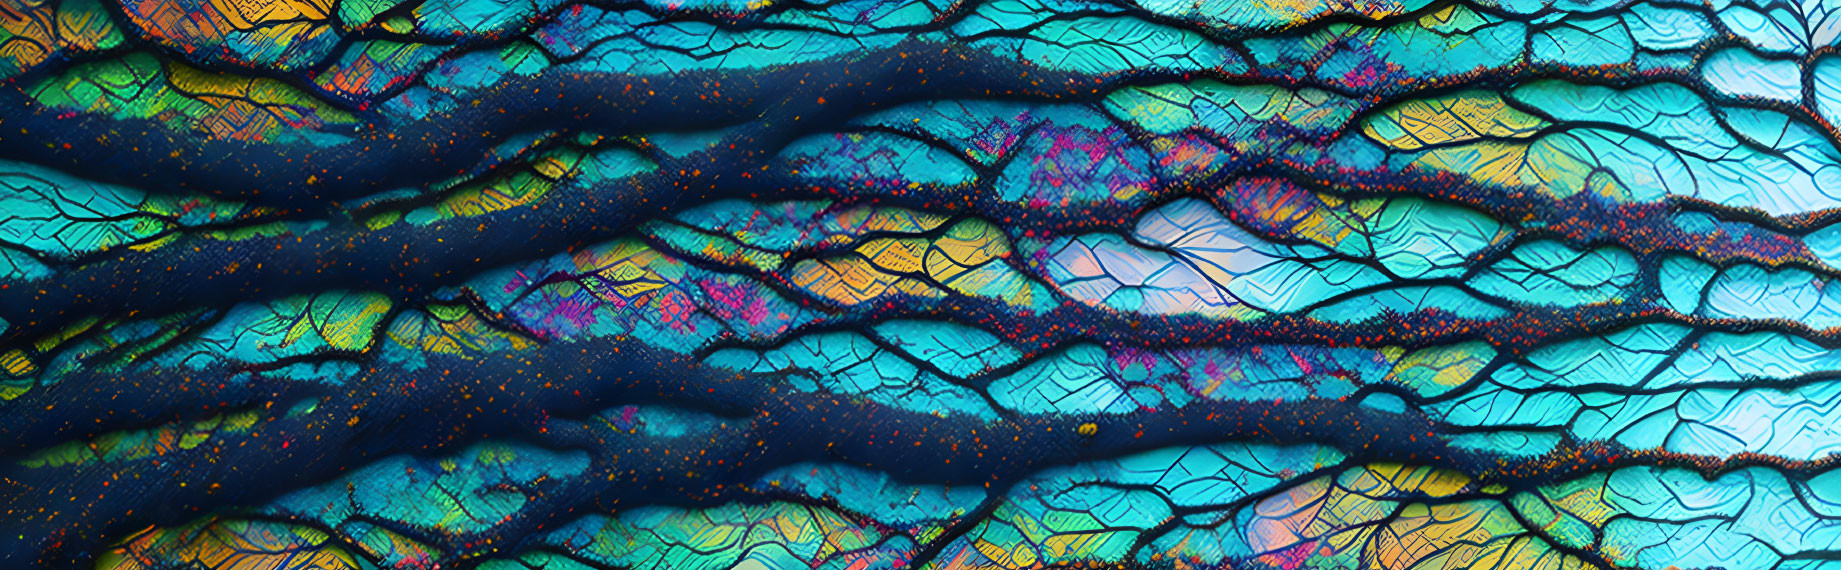 Colorful abstract artwork with crackled textures in blue, yellow, and pink.